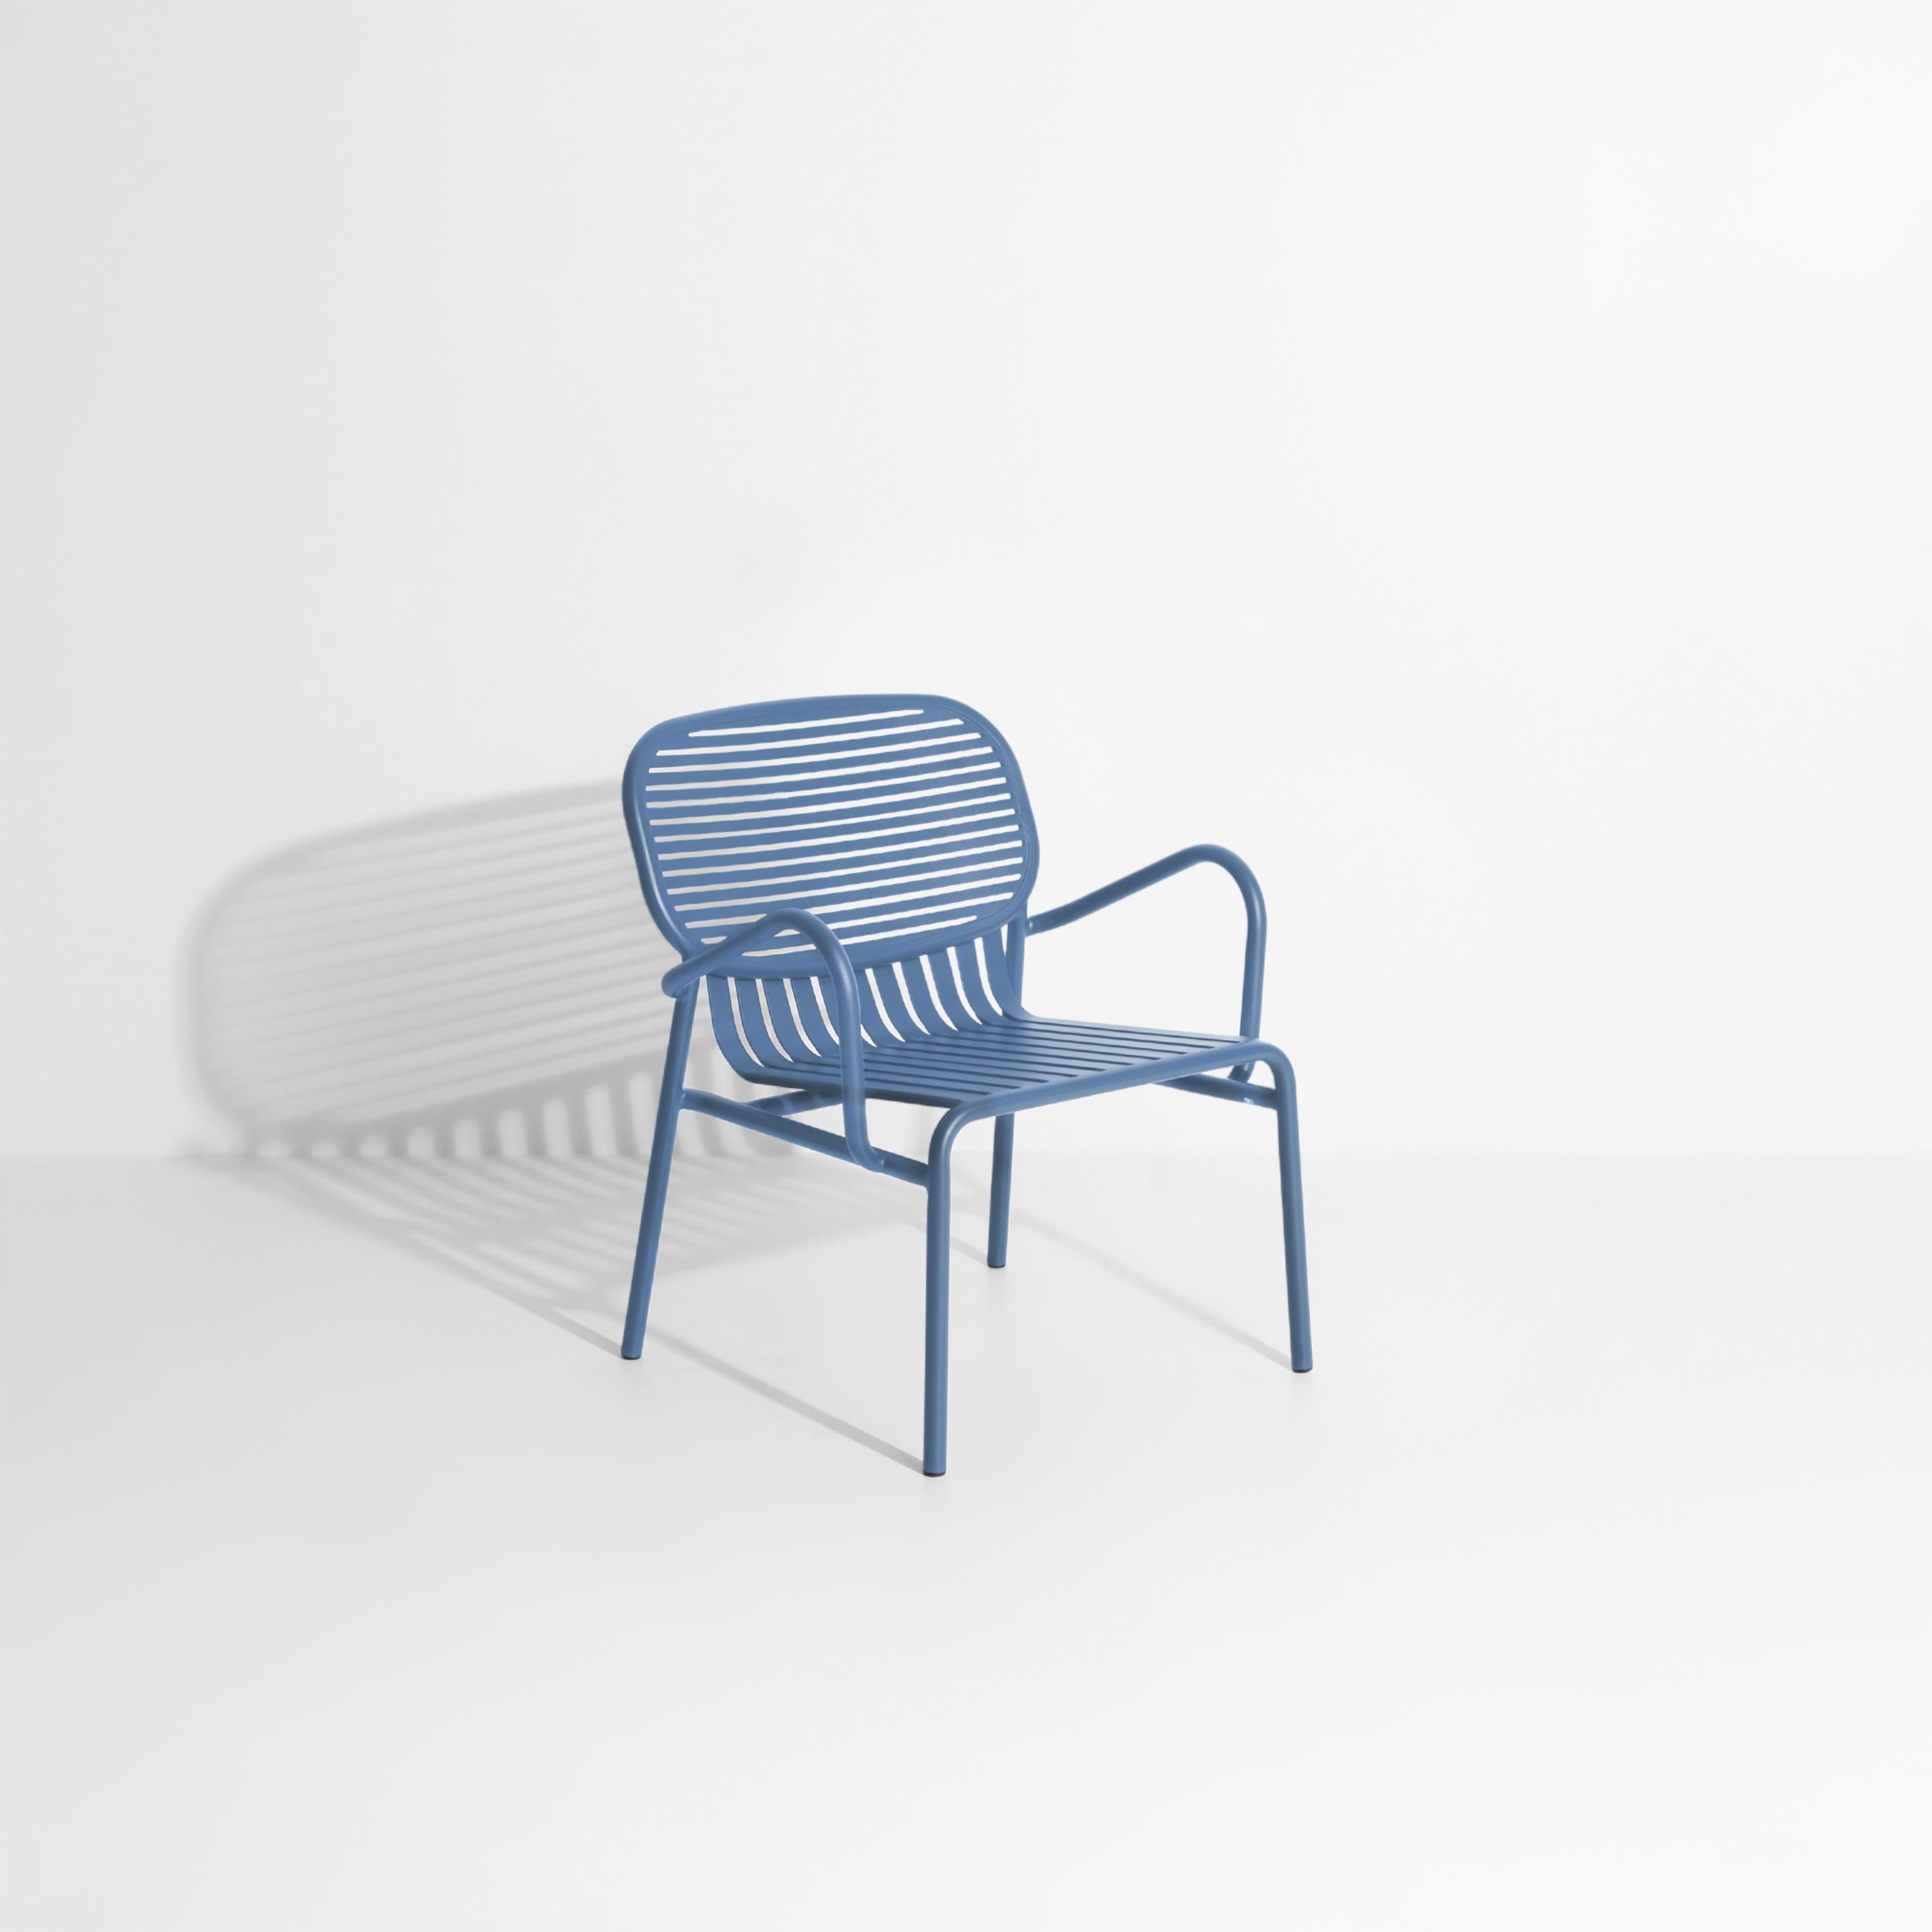 Petite Friture Week-End Armchair in Azur Blue Aluminium by Studio BrichetZiegler, 2017

The week-end collection is a full range of outdoor furniture, in aluminium grained epoxy paint, matt finish, that includes 18 functions and 8 colours for the